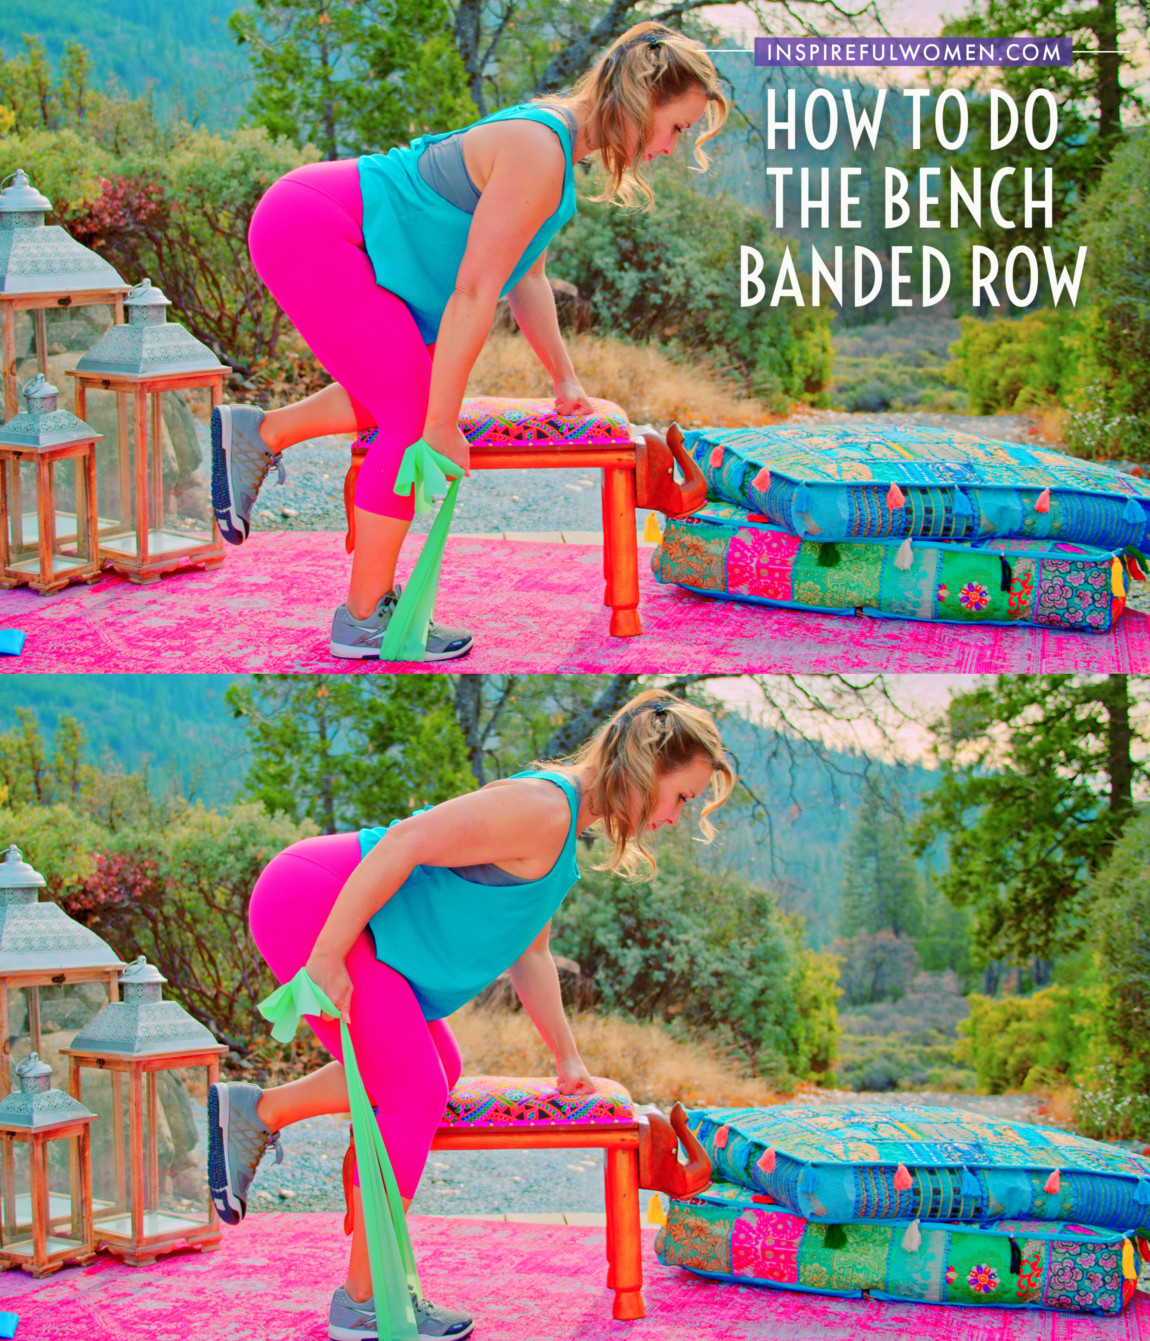 how-to-lat-resistance-band-bent-over-row-with-bench-workout-tutorial-at-home-women-40-plus